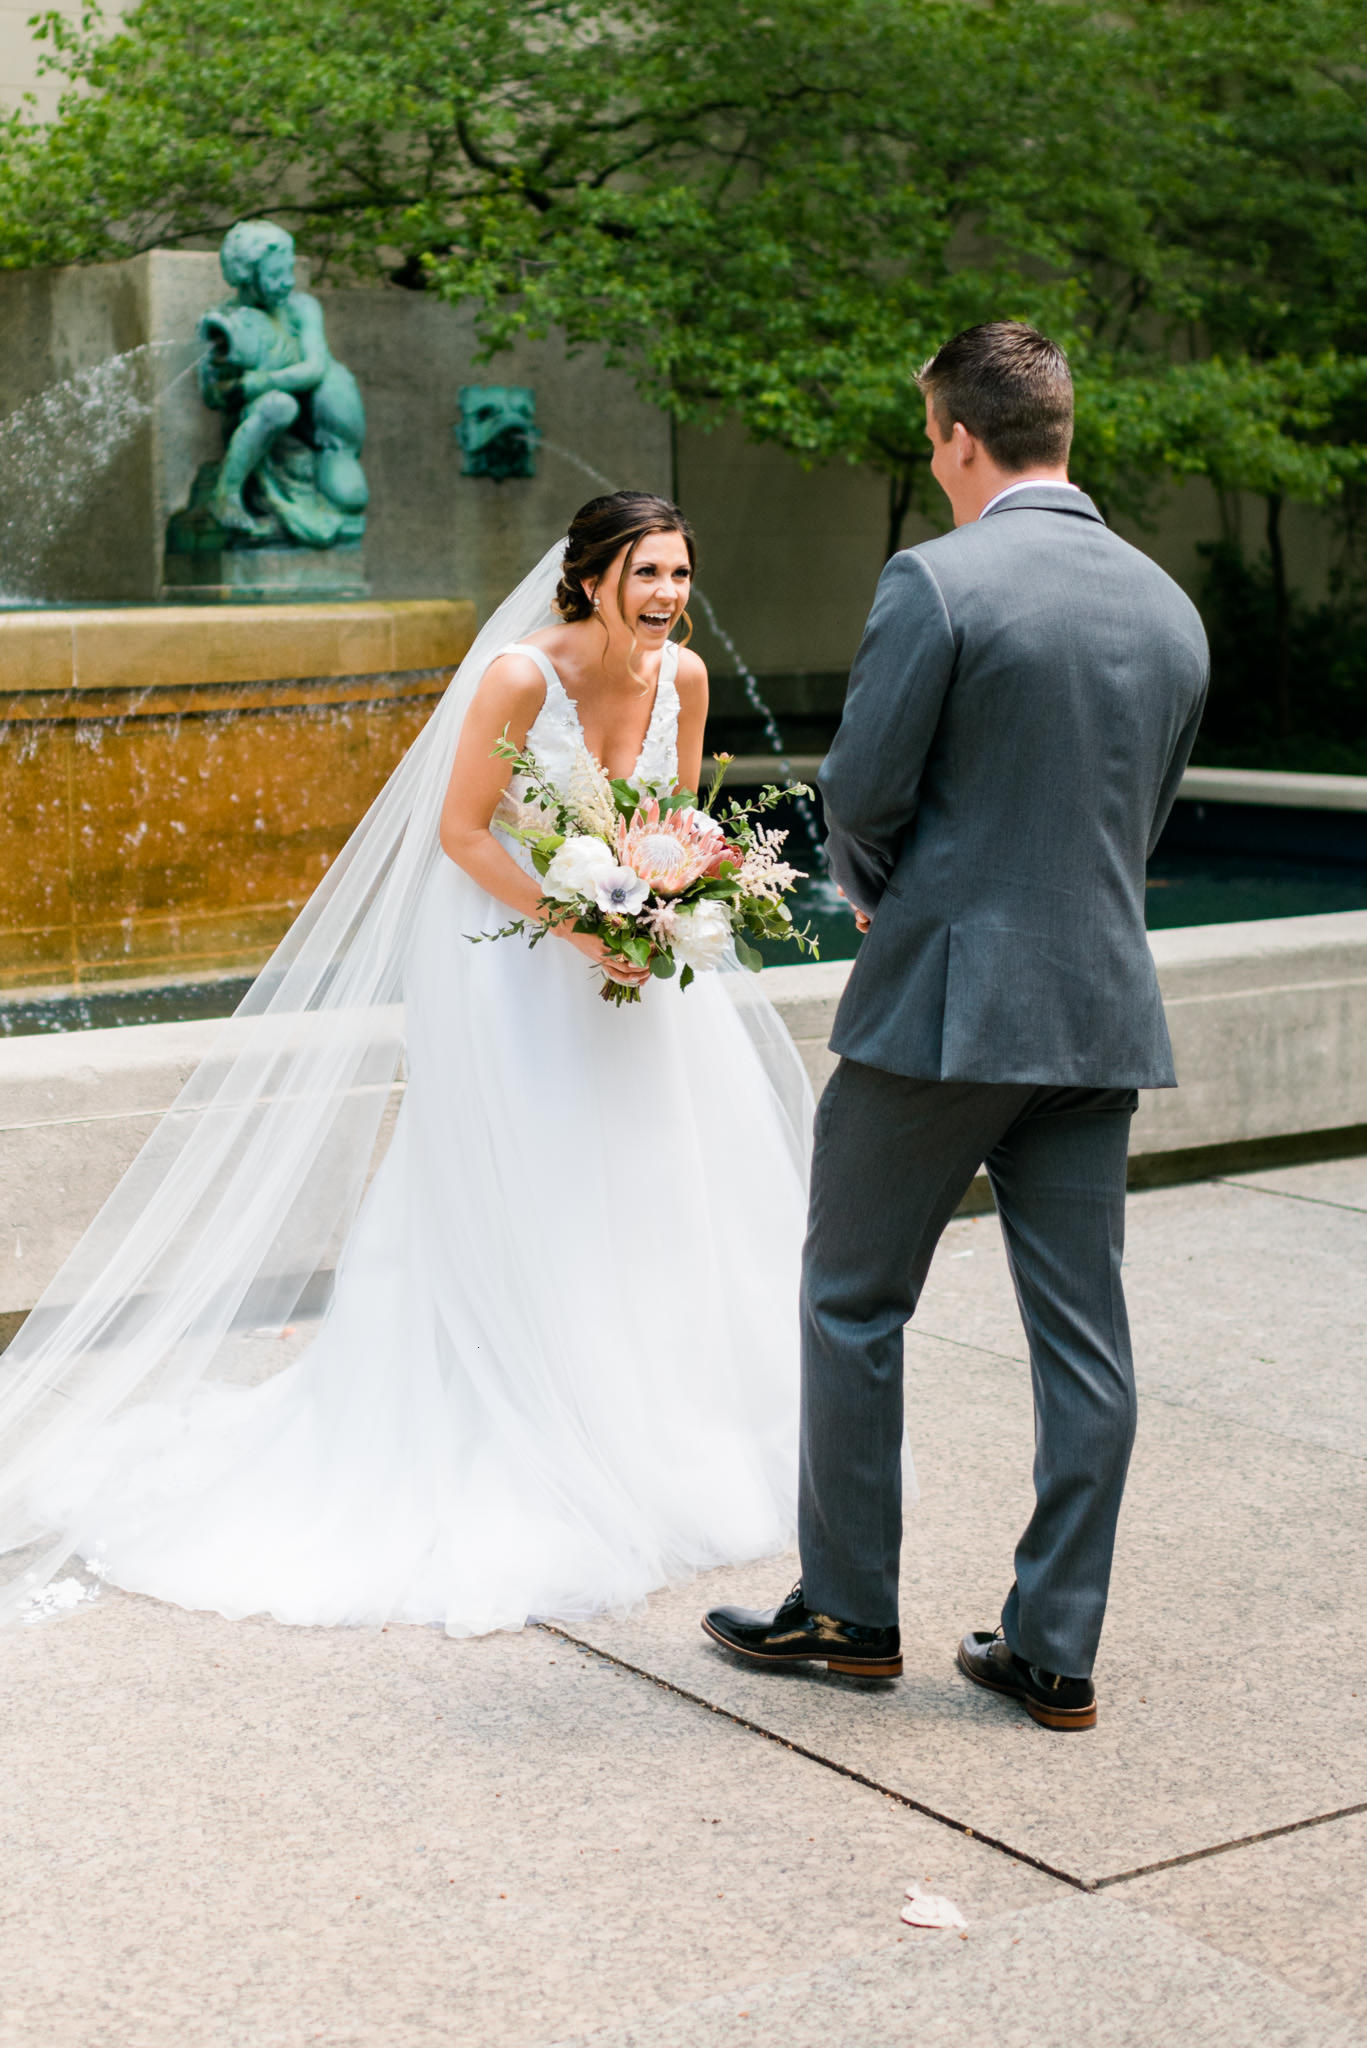 Bride and groom reveal in South Garden at the Art Institute of Chicago for spring wedding at River Roast.